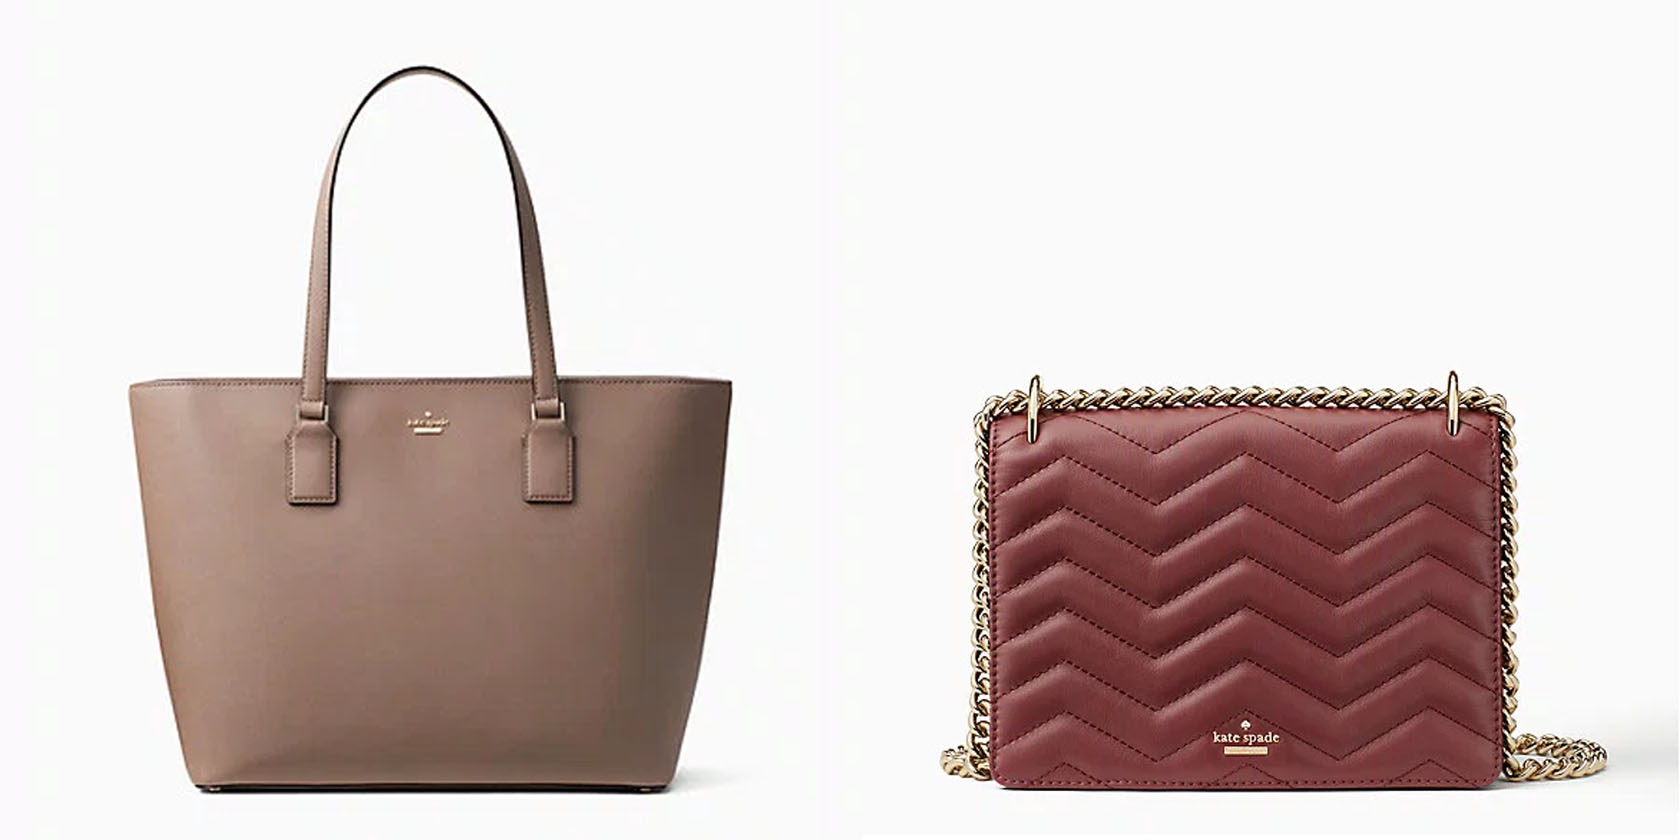 Kate Spade Valentine's Day Sale refreshes your handbags, apparel & more ...